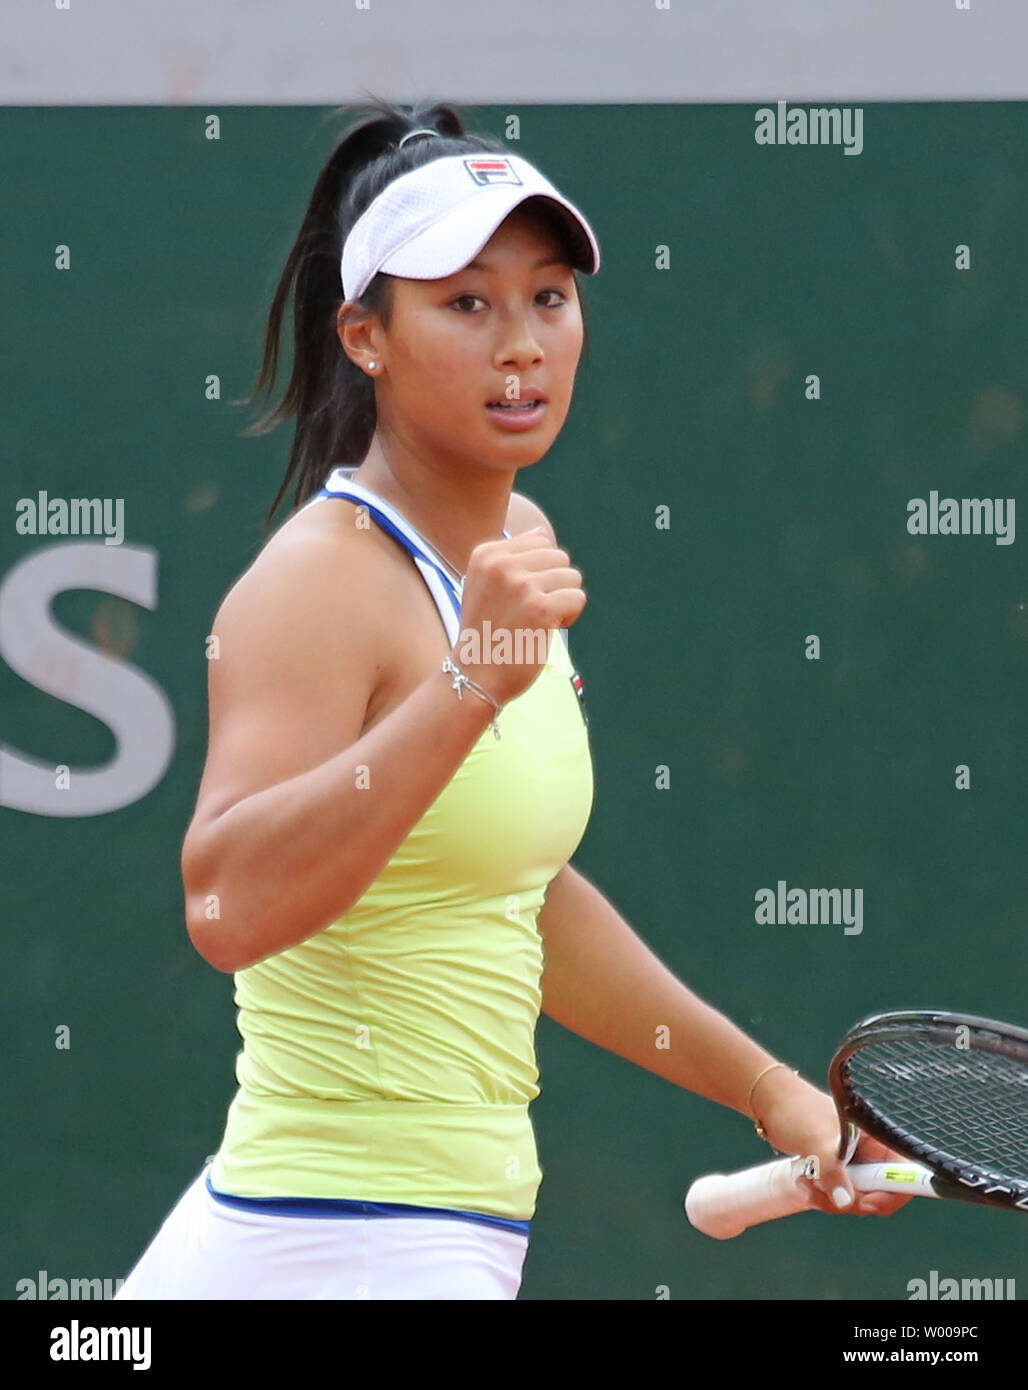 Australian Priscilla Hon reacts after a shot during her French Open women's  second round match against American Madison Keys at Roland Garros in Paris  on May 31, 2019. Keys defeated Hon 7-5,